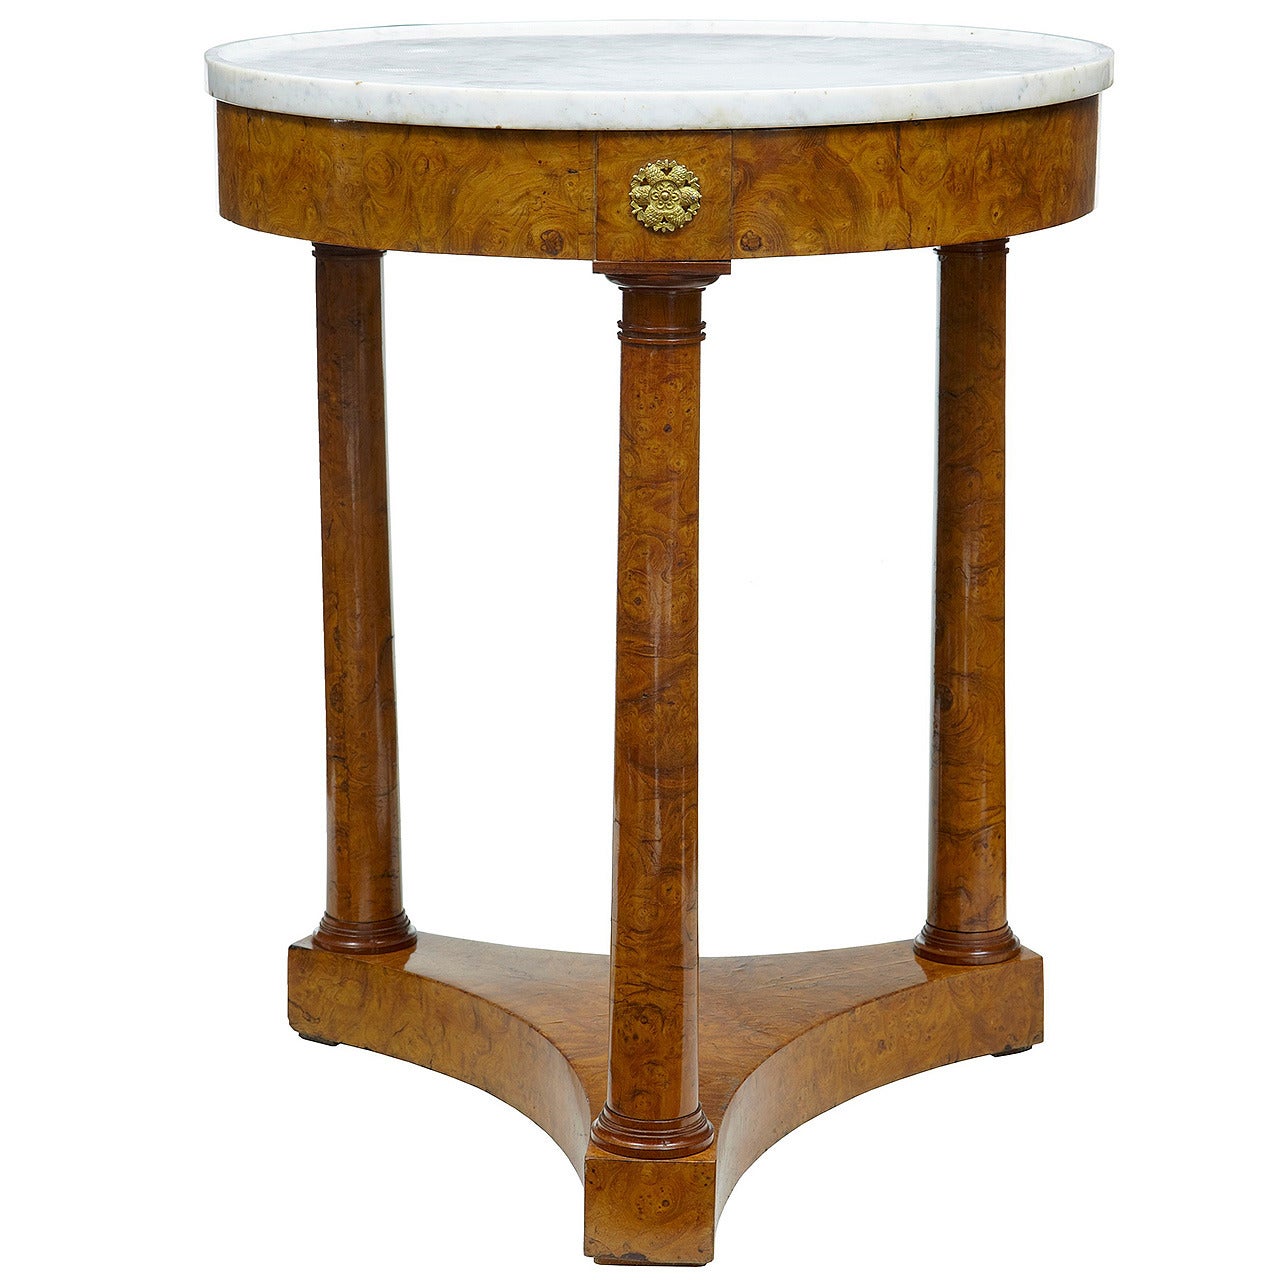 Late 19th Century Empire Influenced Round Birch Marble Top Occasional Table